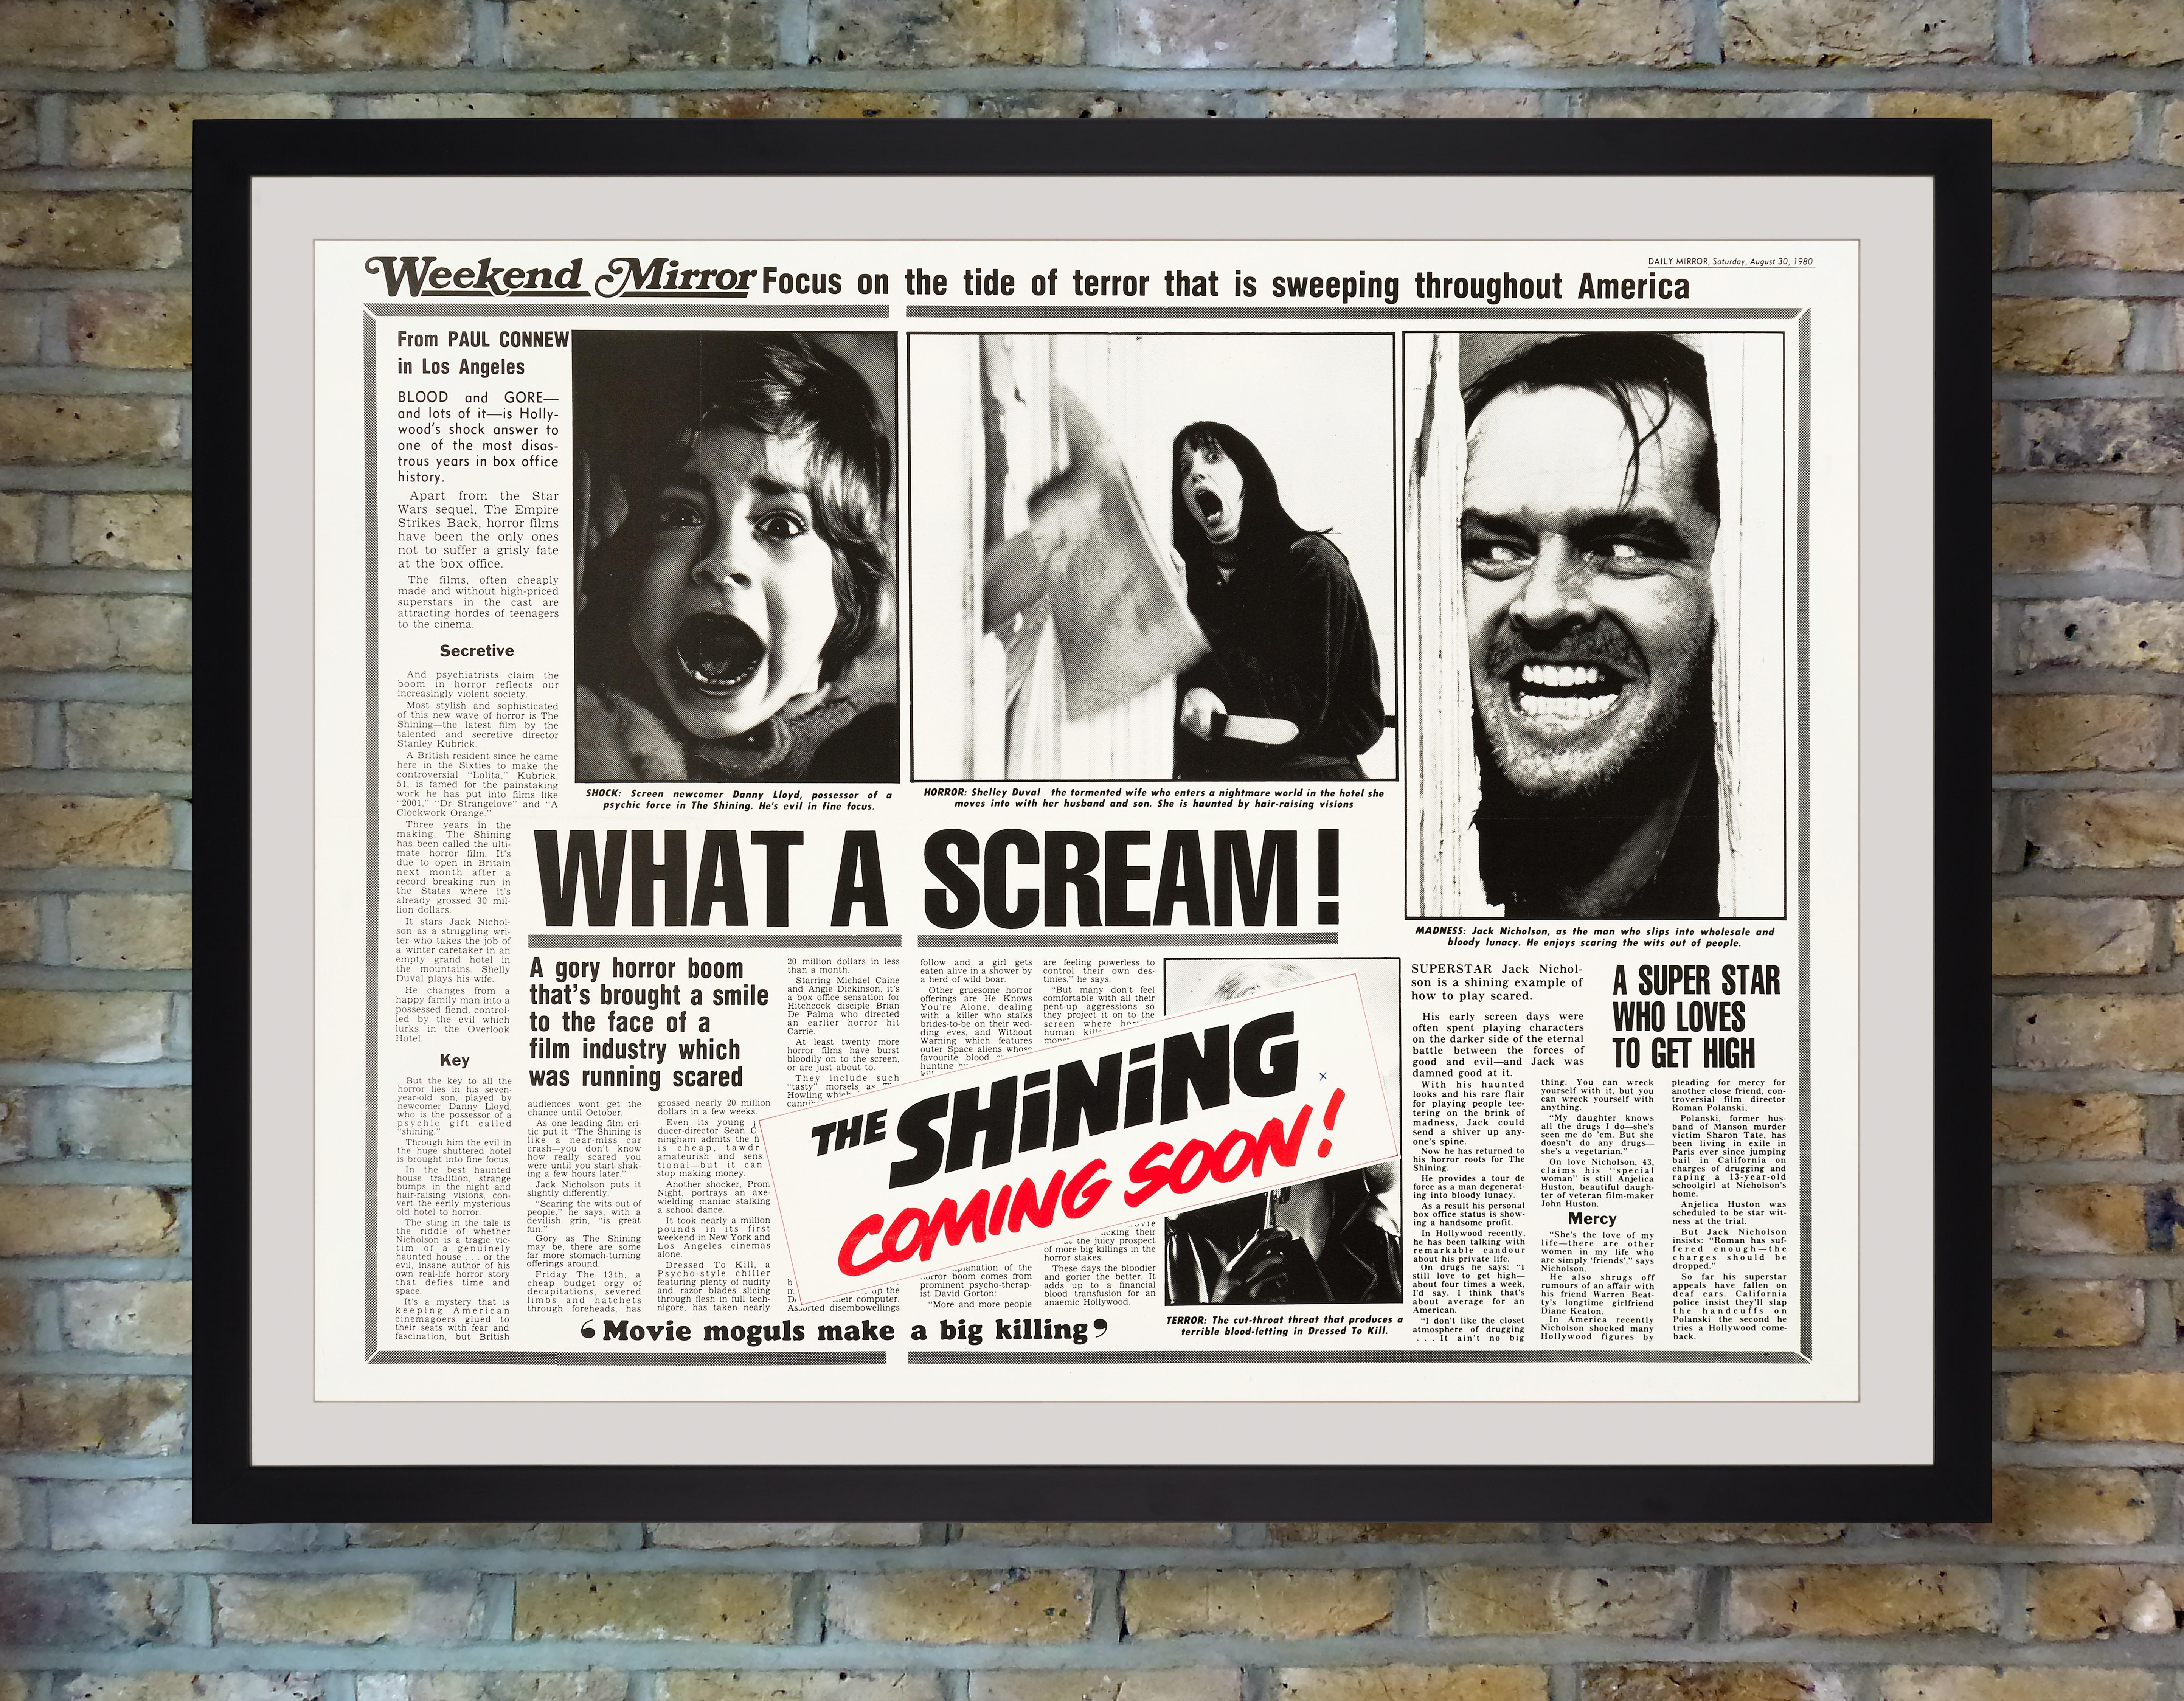 A scarce and unusual 'Weekend Mirror' style teaser quad for the British release of Stanley Kubrick's 1980 modern horror masterpiece 'The Shining,' starring Jack Nicholson and Shelley Duvall. Based on the bestselling novel by Stephen King, the